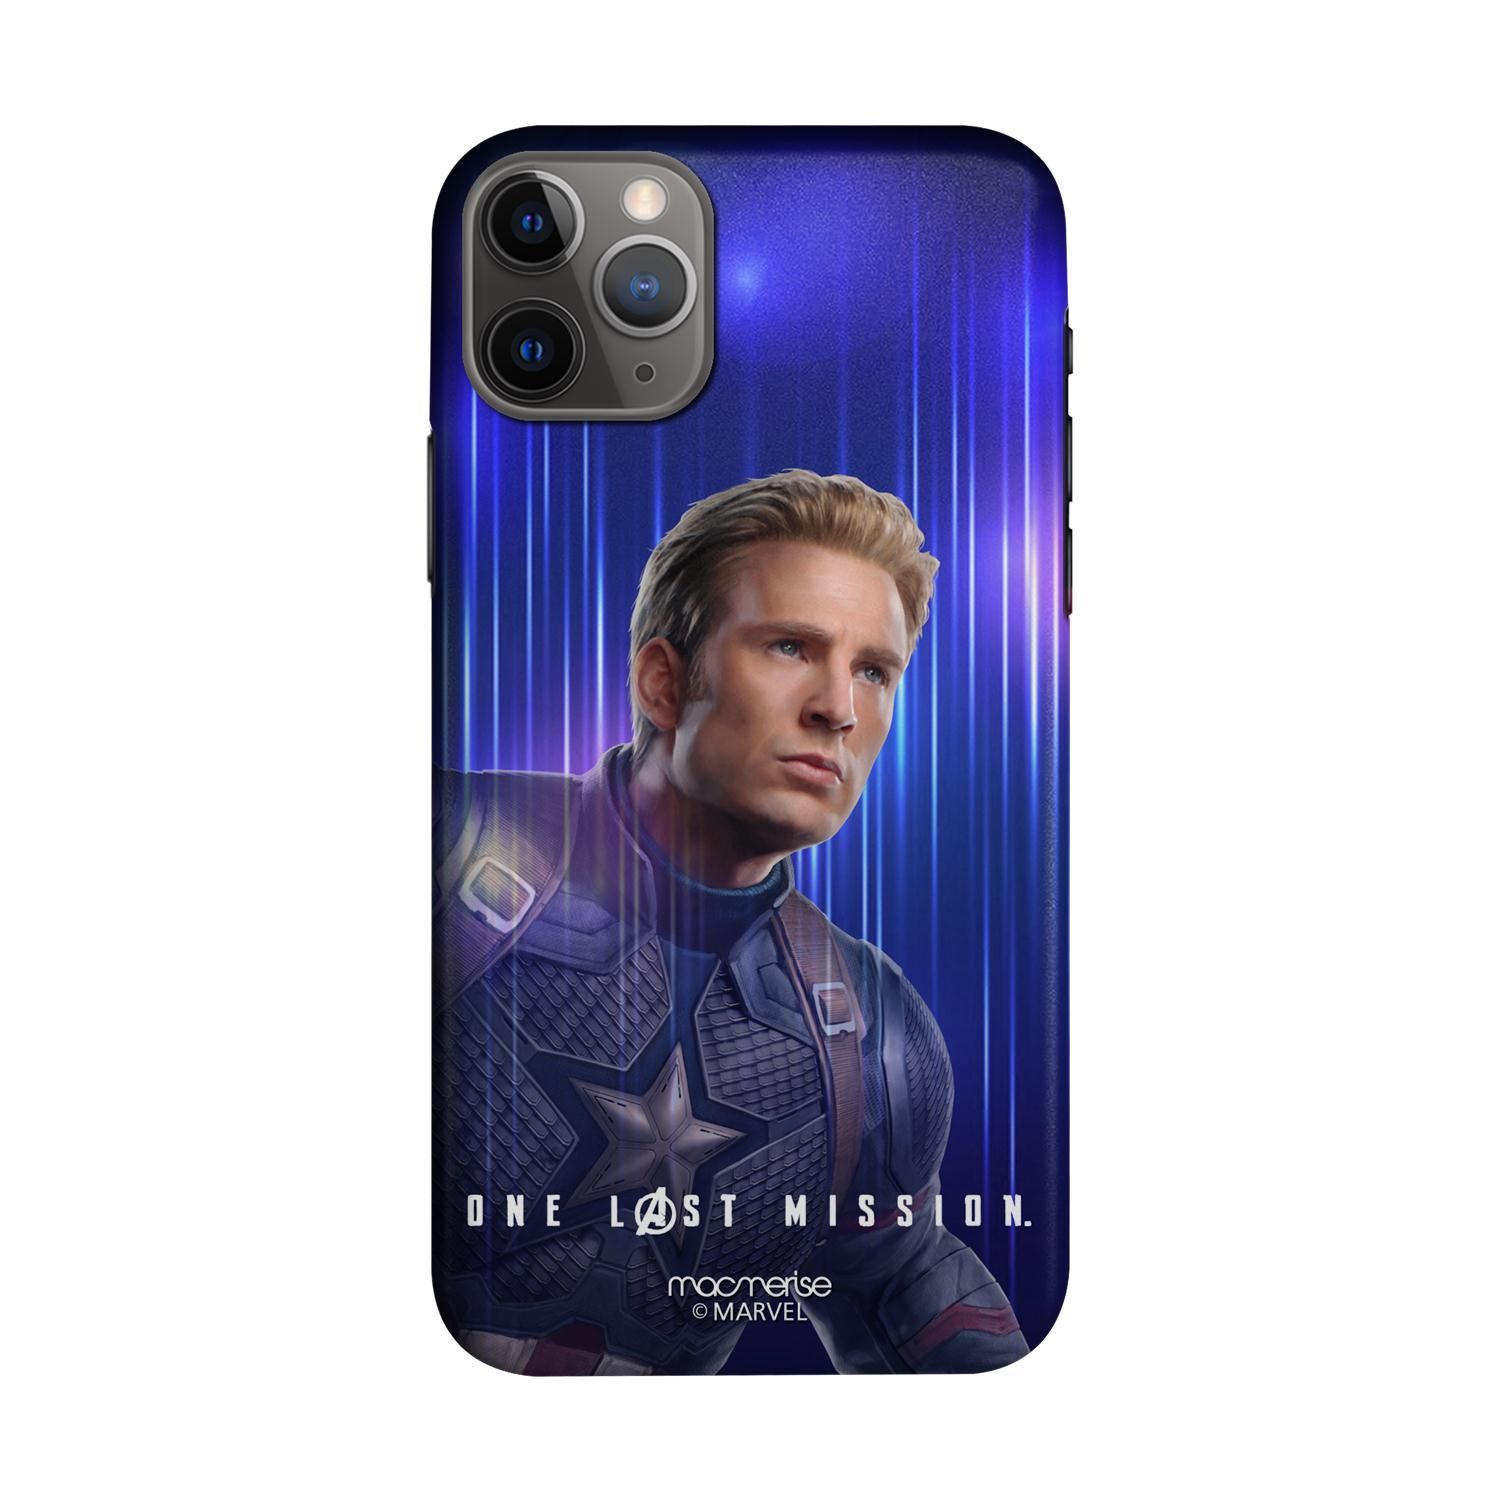 Buy One Last Mission - Sleek Phone Case for iPhone 11 Pro Max Online